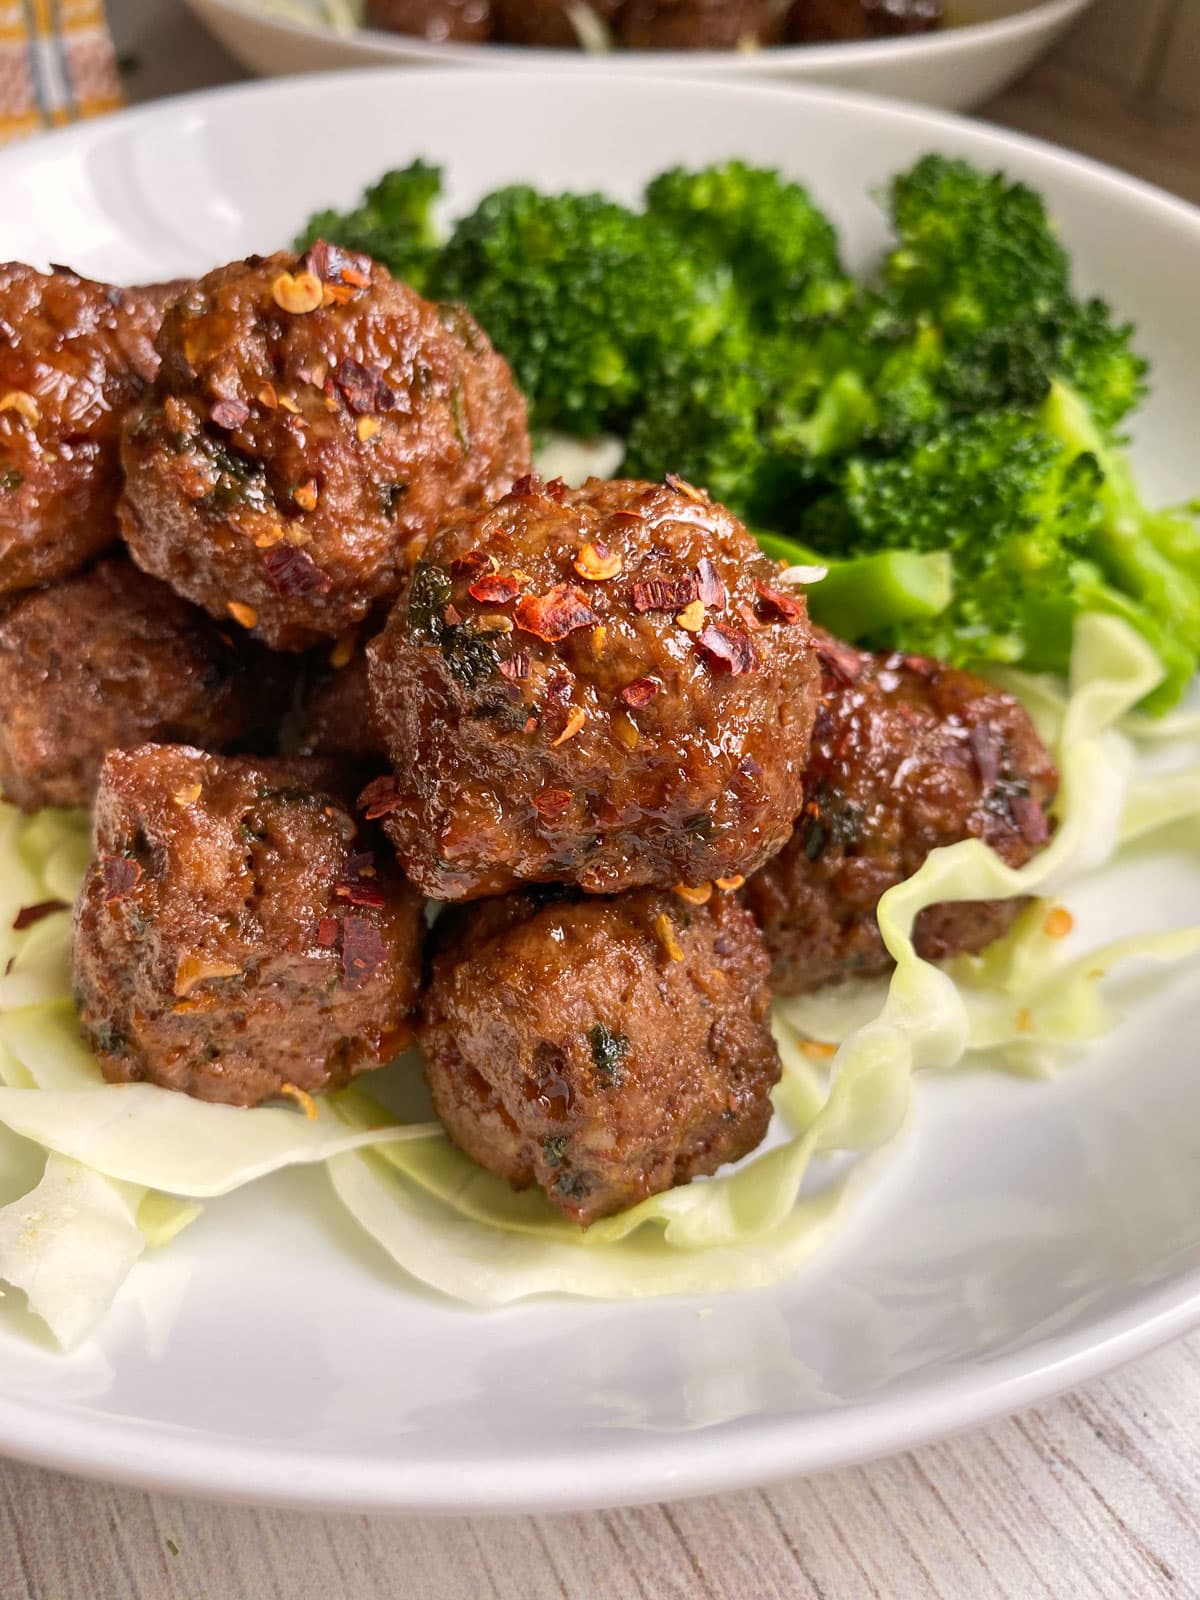 side view of meatballs on plate with veggies